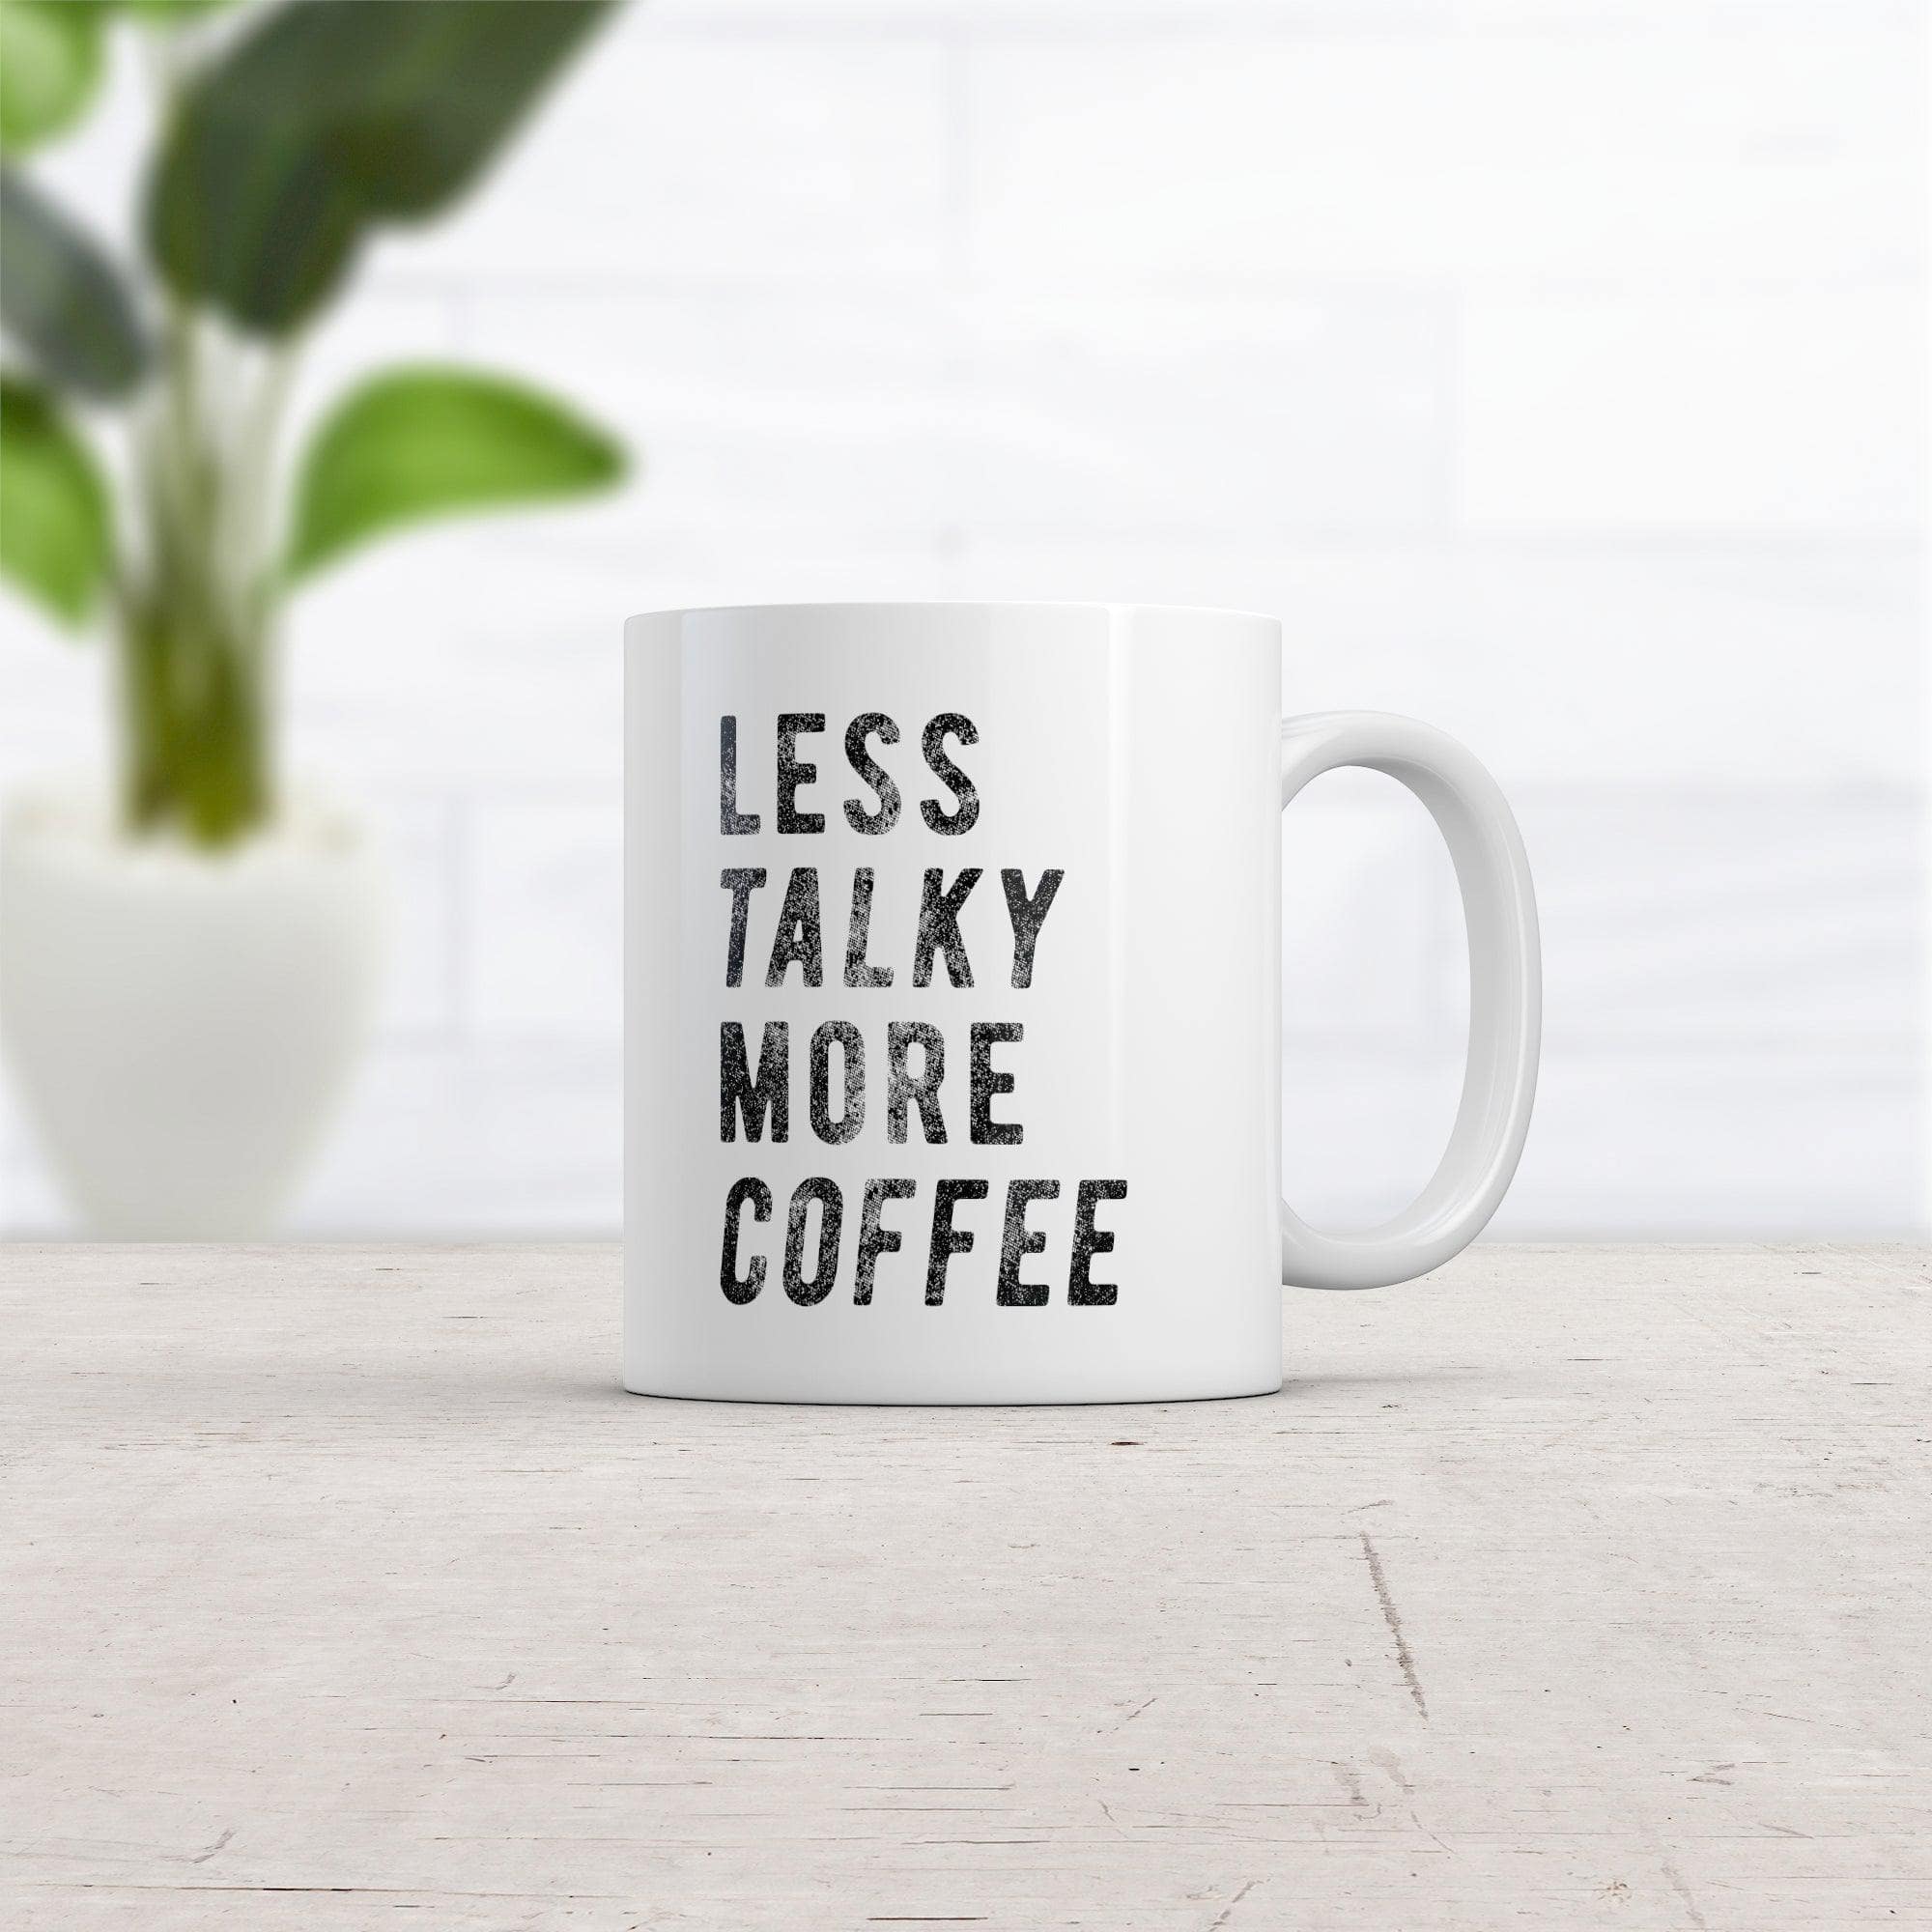 Less Talky More Coffee Mug Funny Sarcastic Antisocial Caffeine Lovers Novelty Cup-11oz  -  Crazy Dog T-Shirts